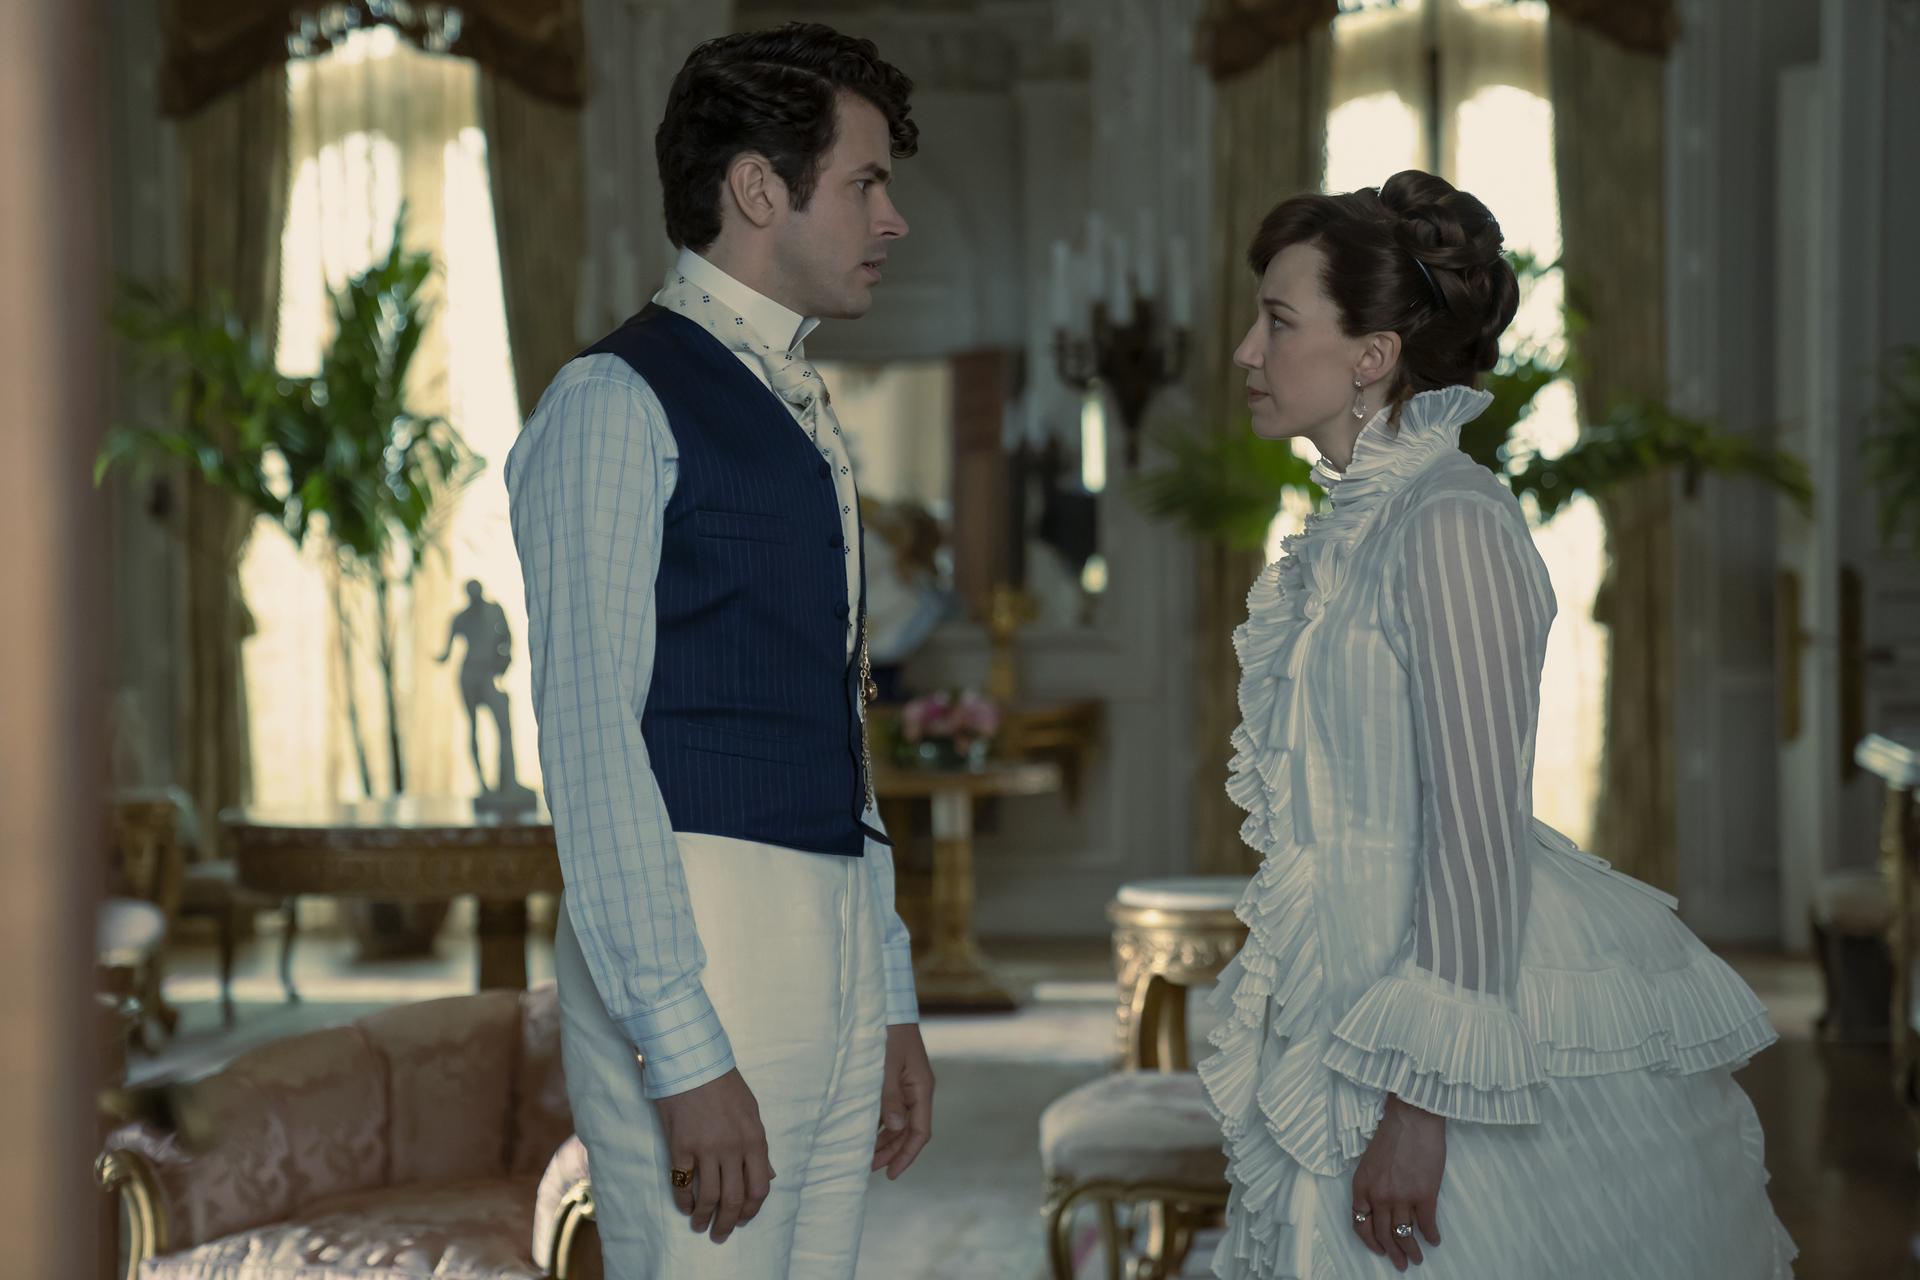 Harry Richardson as Larry Russell and Carrie Coon as Bertha Russell have it out in 'The Gilded Age' Season 2